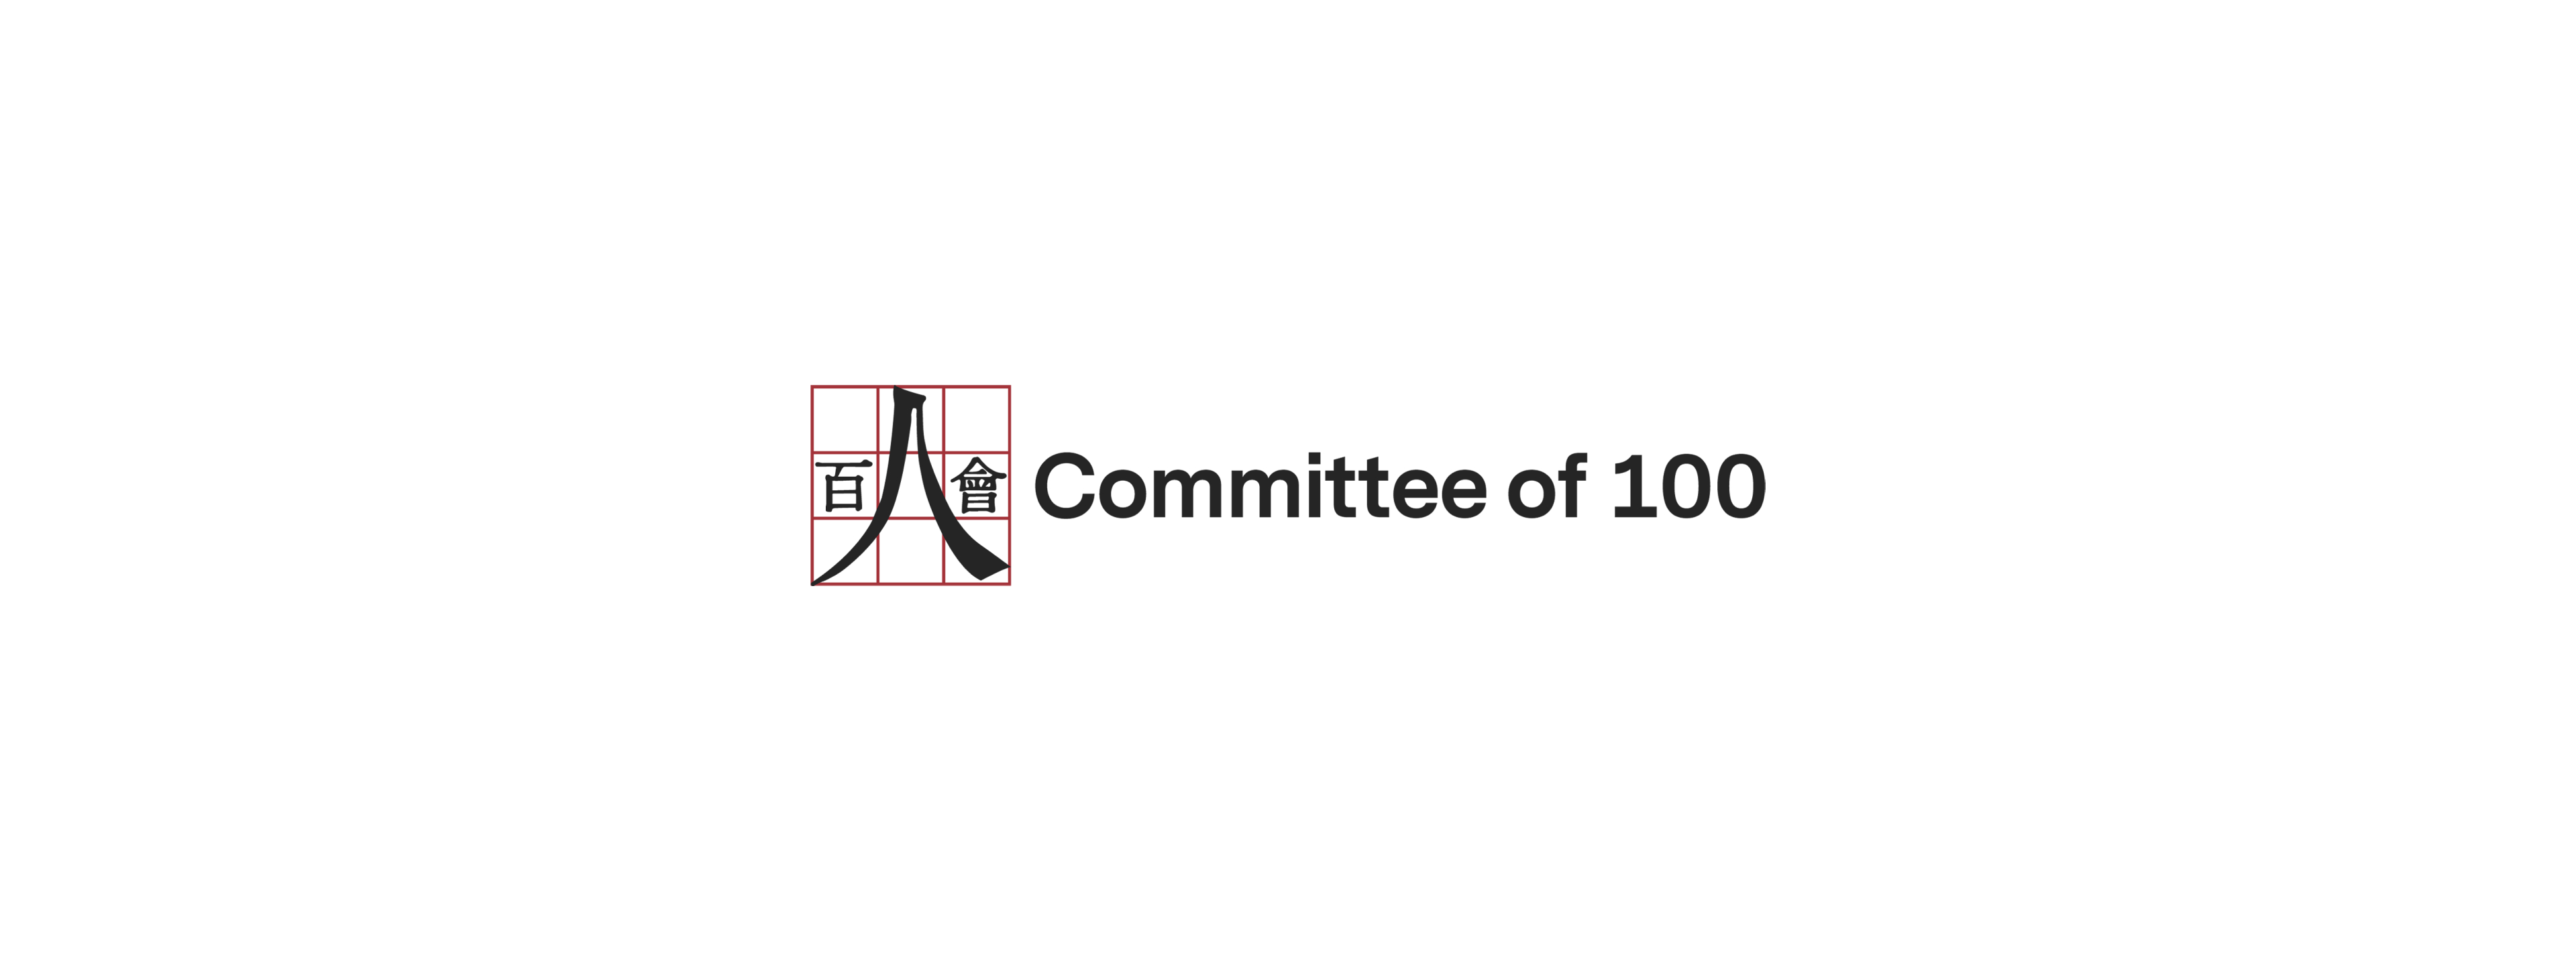 Committee of 100 Commends President-Elect Donald Trump and Congratulates Elaine Chao on Nomination as U.S. Secretary of Transportation